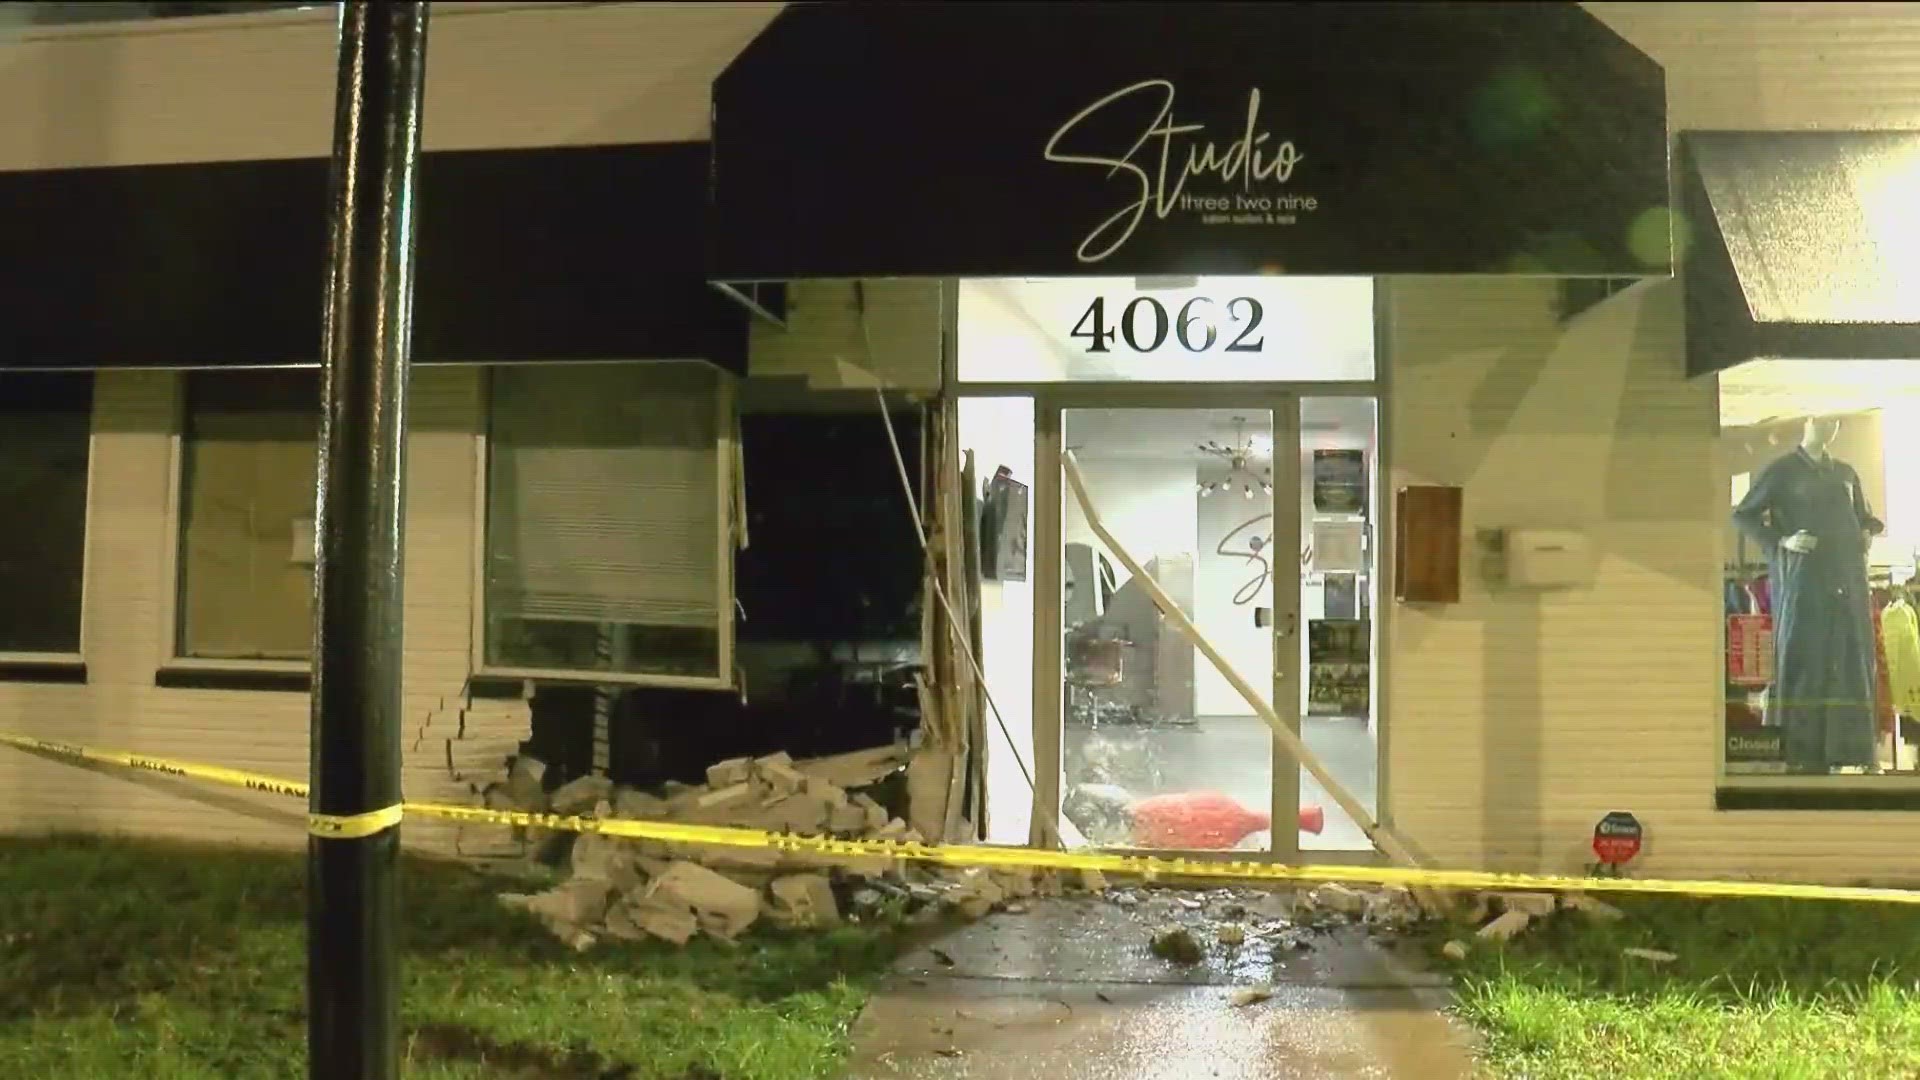 Studi32Nine Salon Spa & K’Janèe Boutique have been open for just under a year. The family owned business isn't sure when they will be able to reopen.